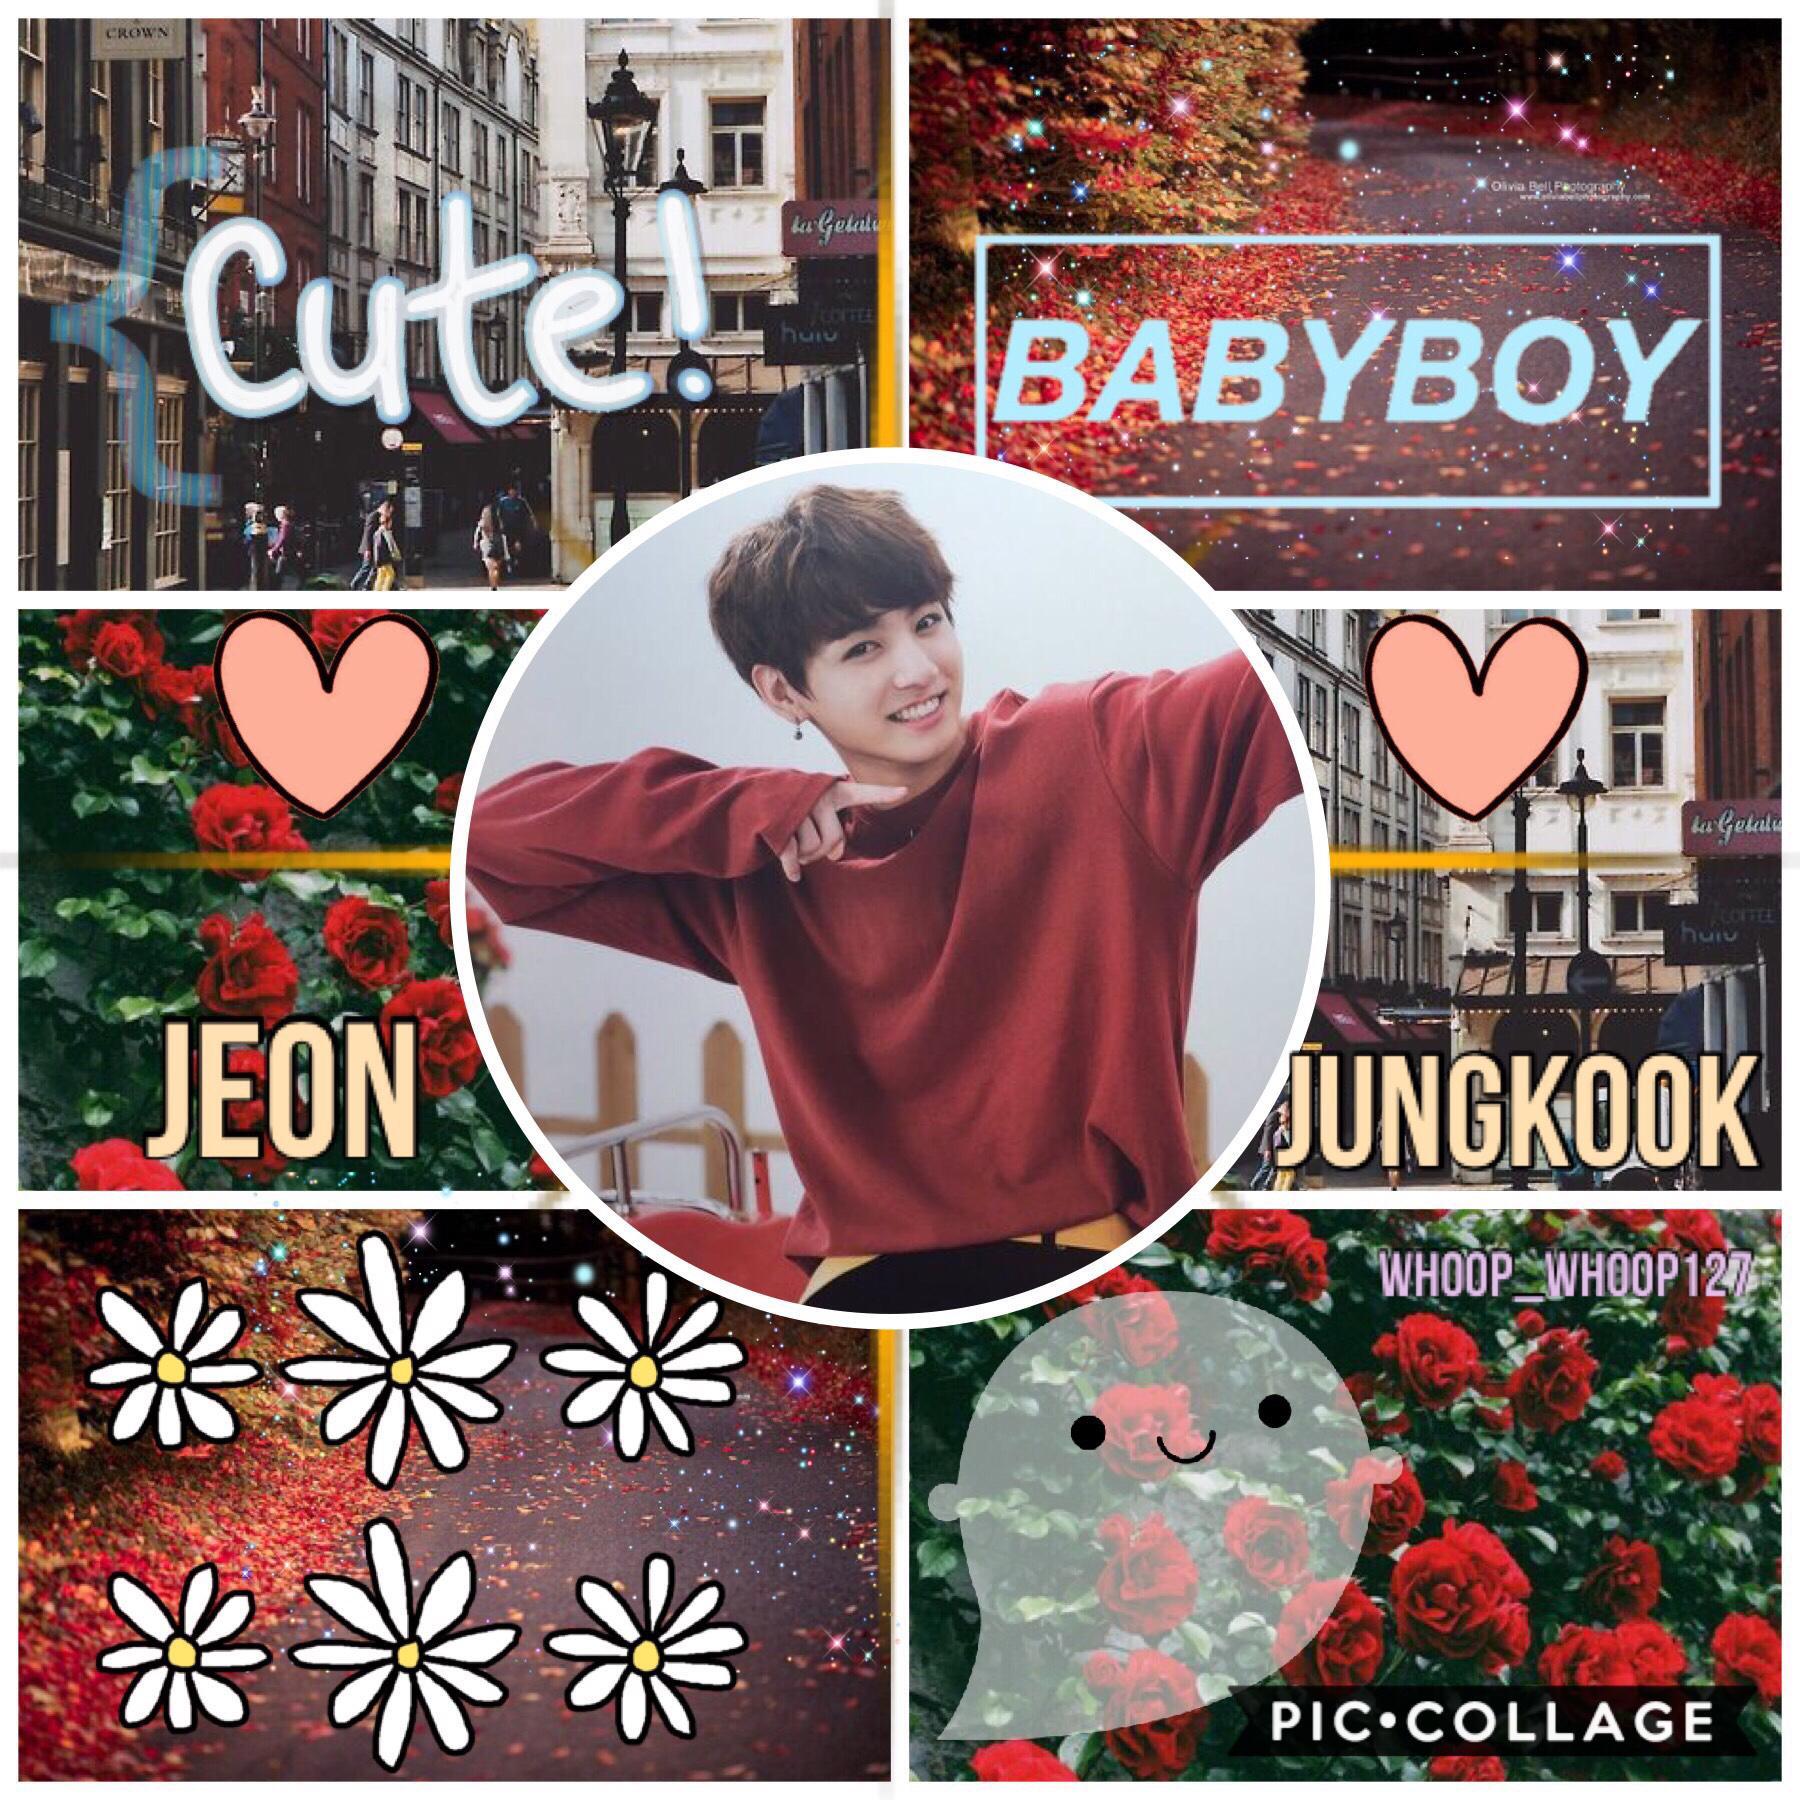 •🚒•
🍃Jungkook~BTS🍃
I made this edit for my eomma😊😊@Rose_Panda💞💞
LMAÖ school is great I got a lot of homework but I don’t mind I like my classmates 😊😊😝